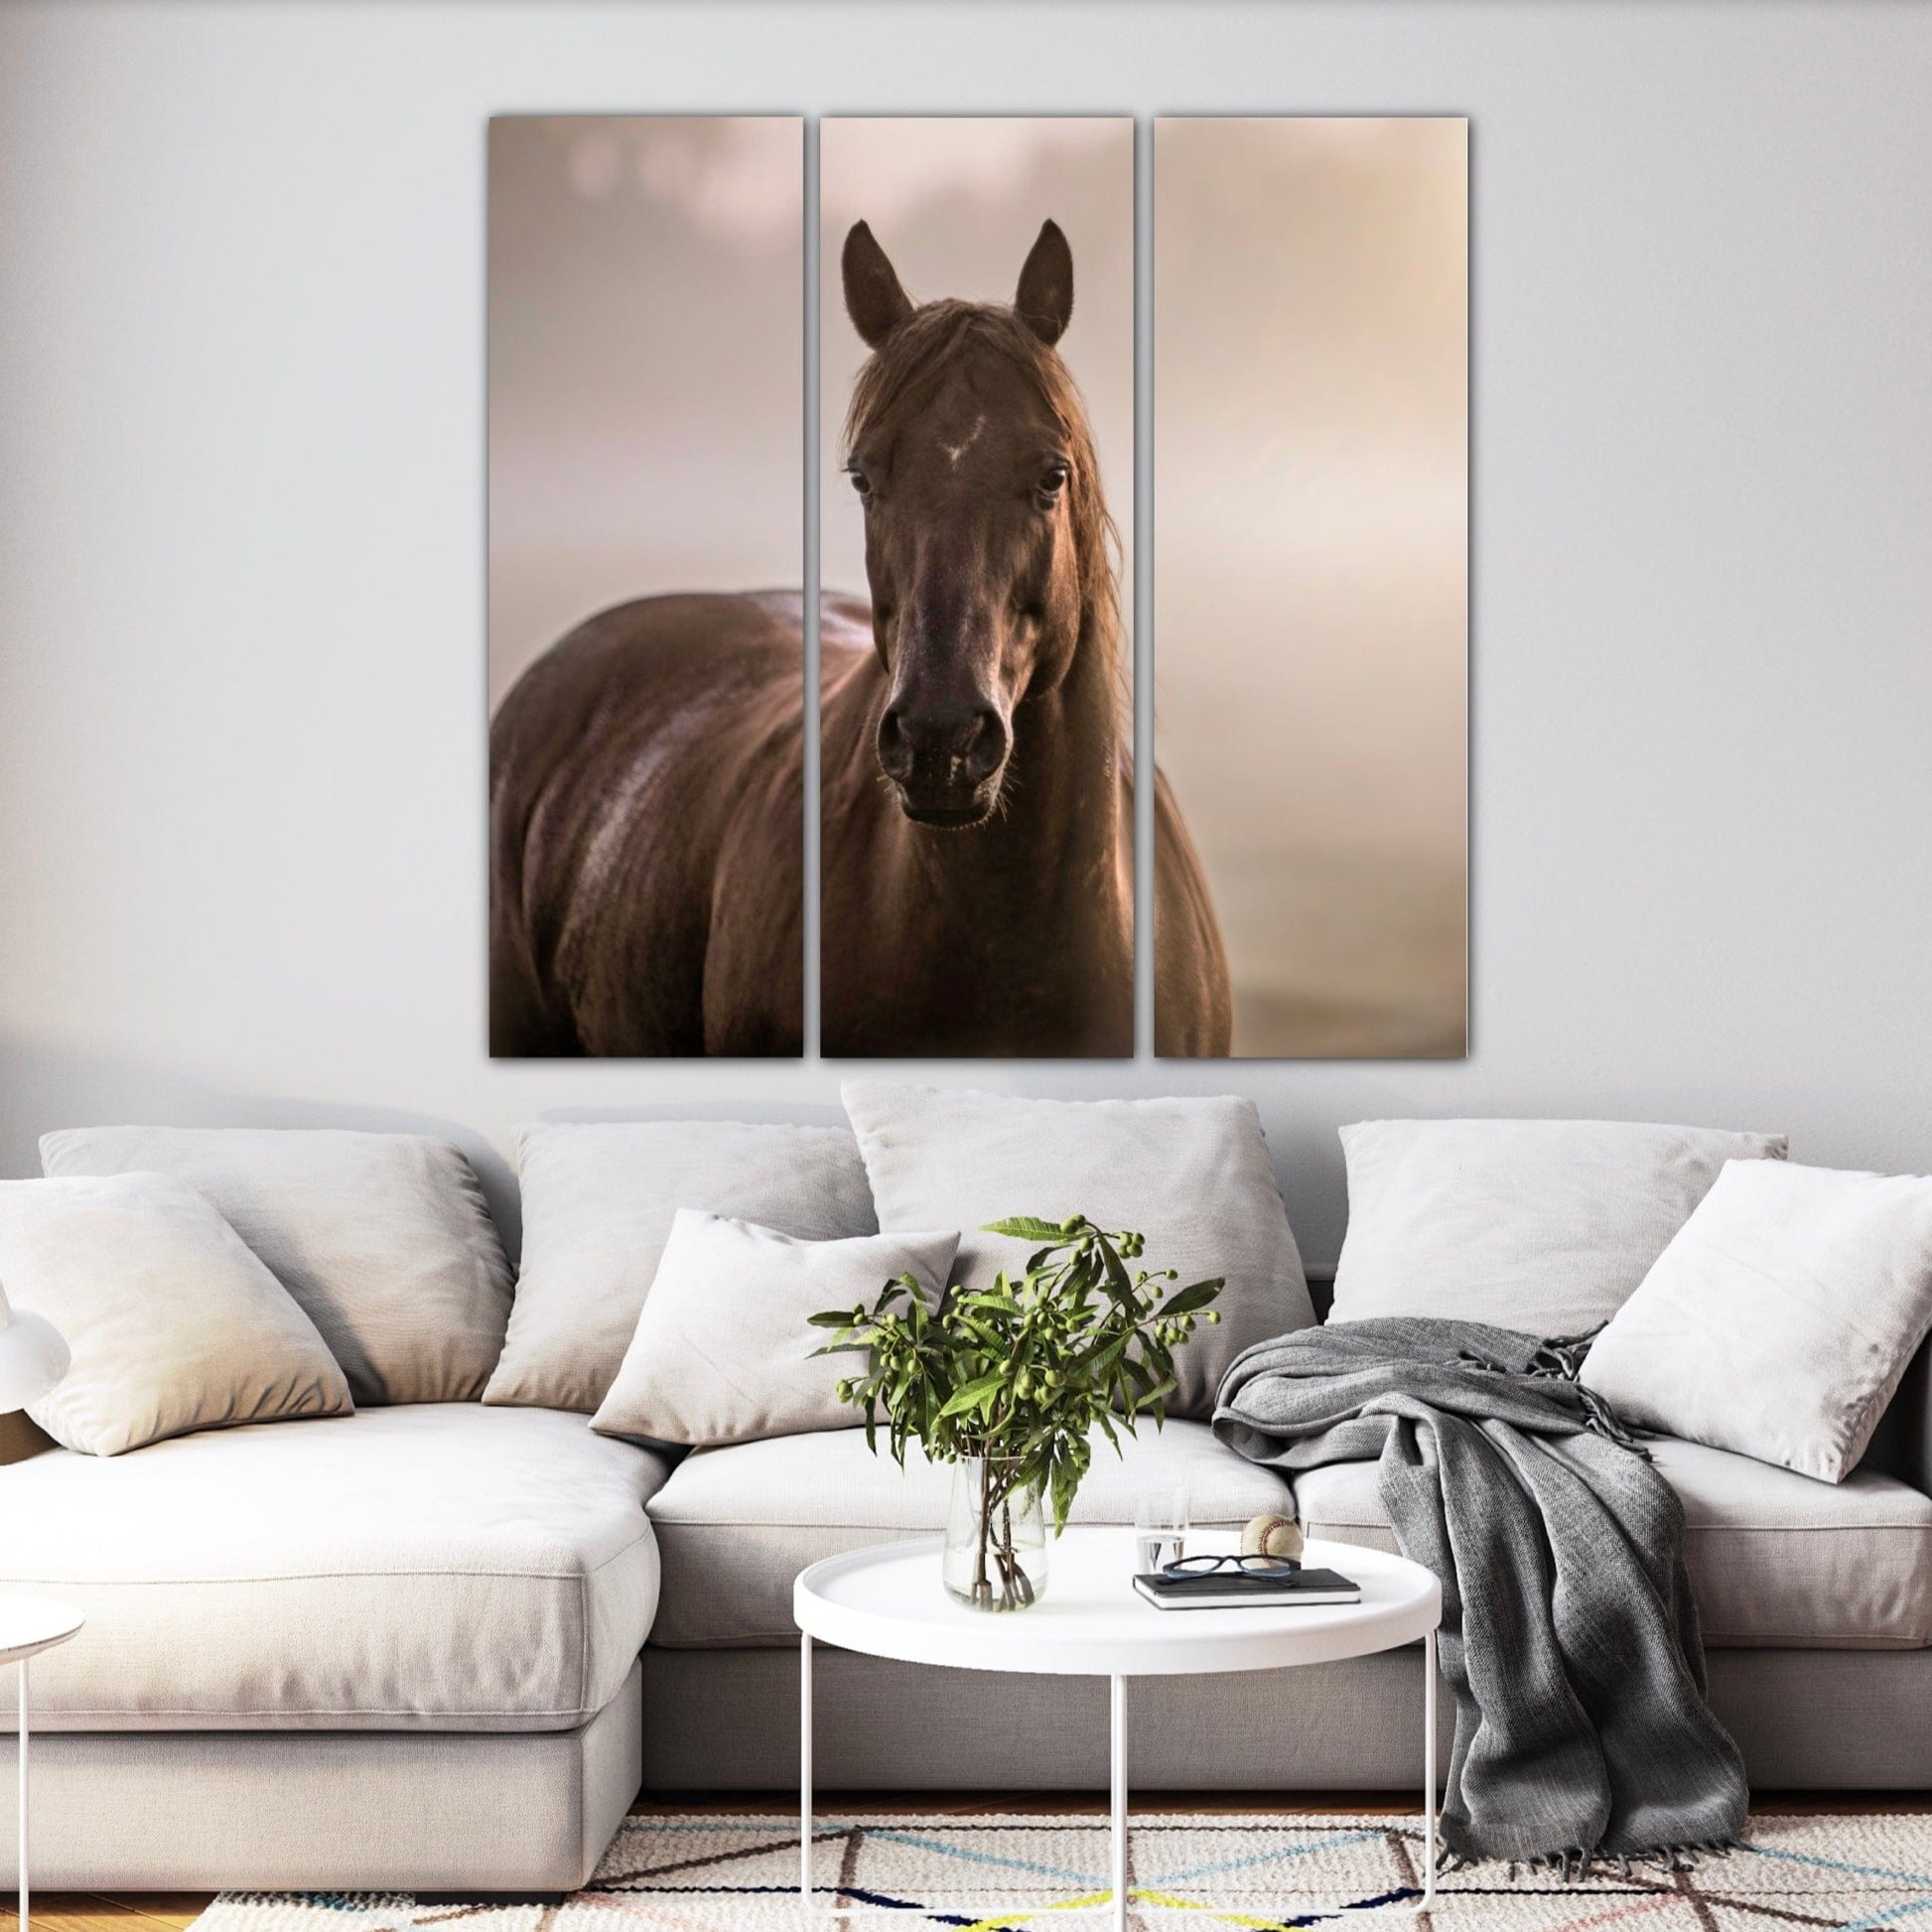 Square Horse Triptych Wall Art Teri James Photography